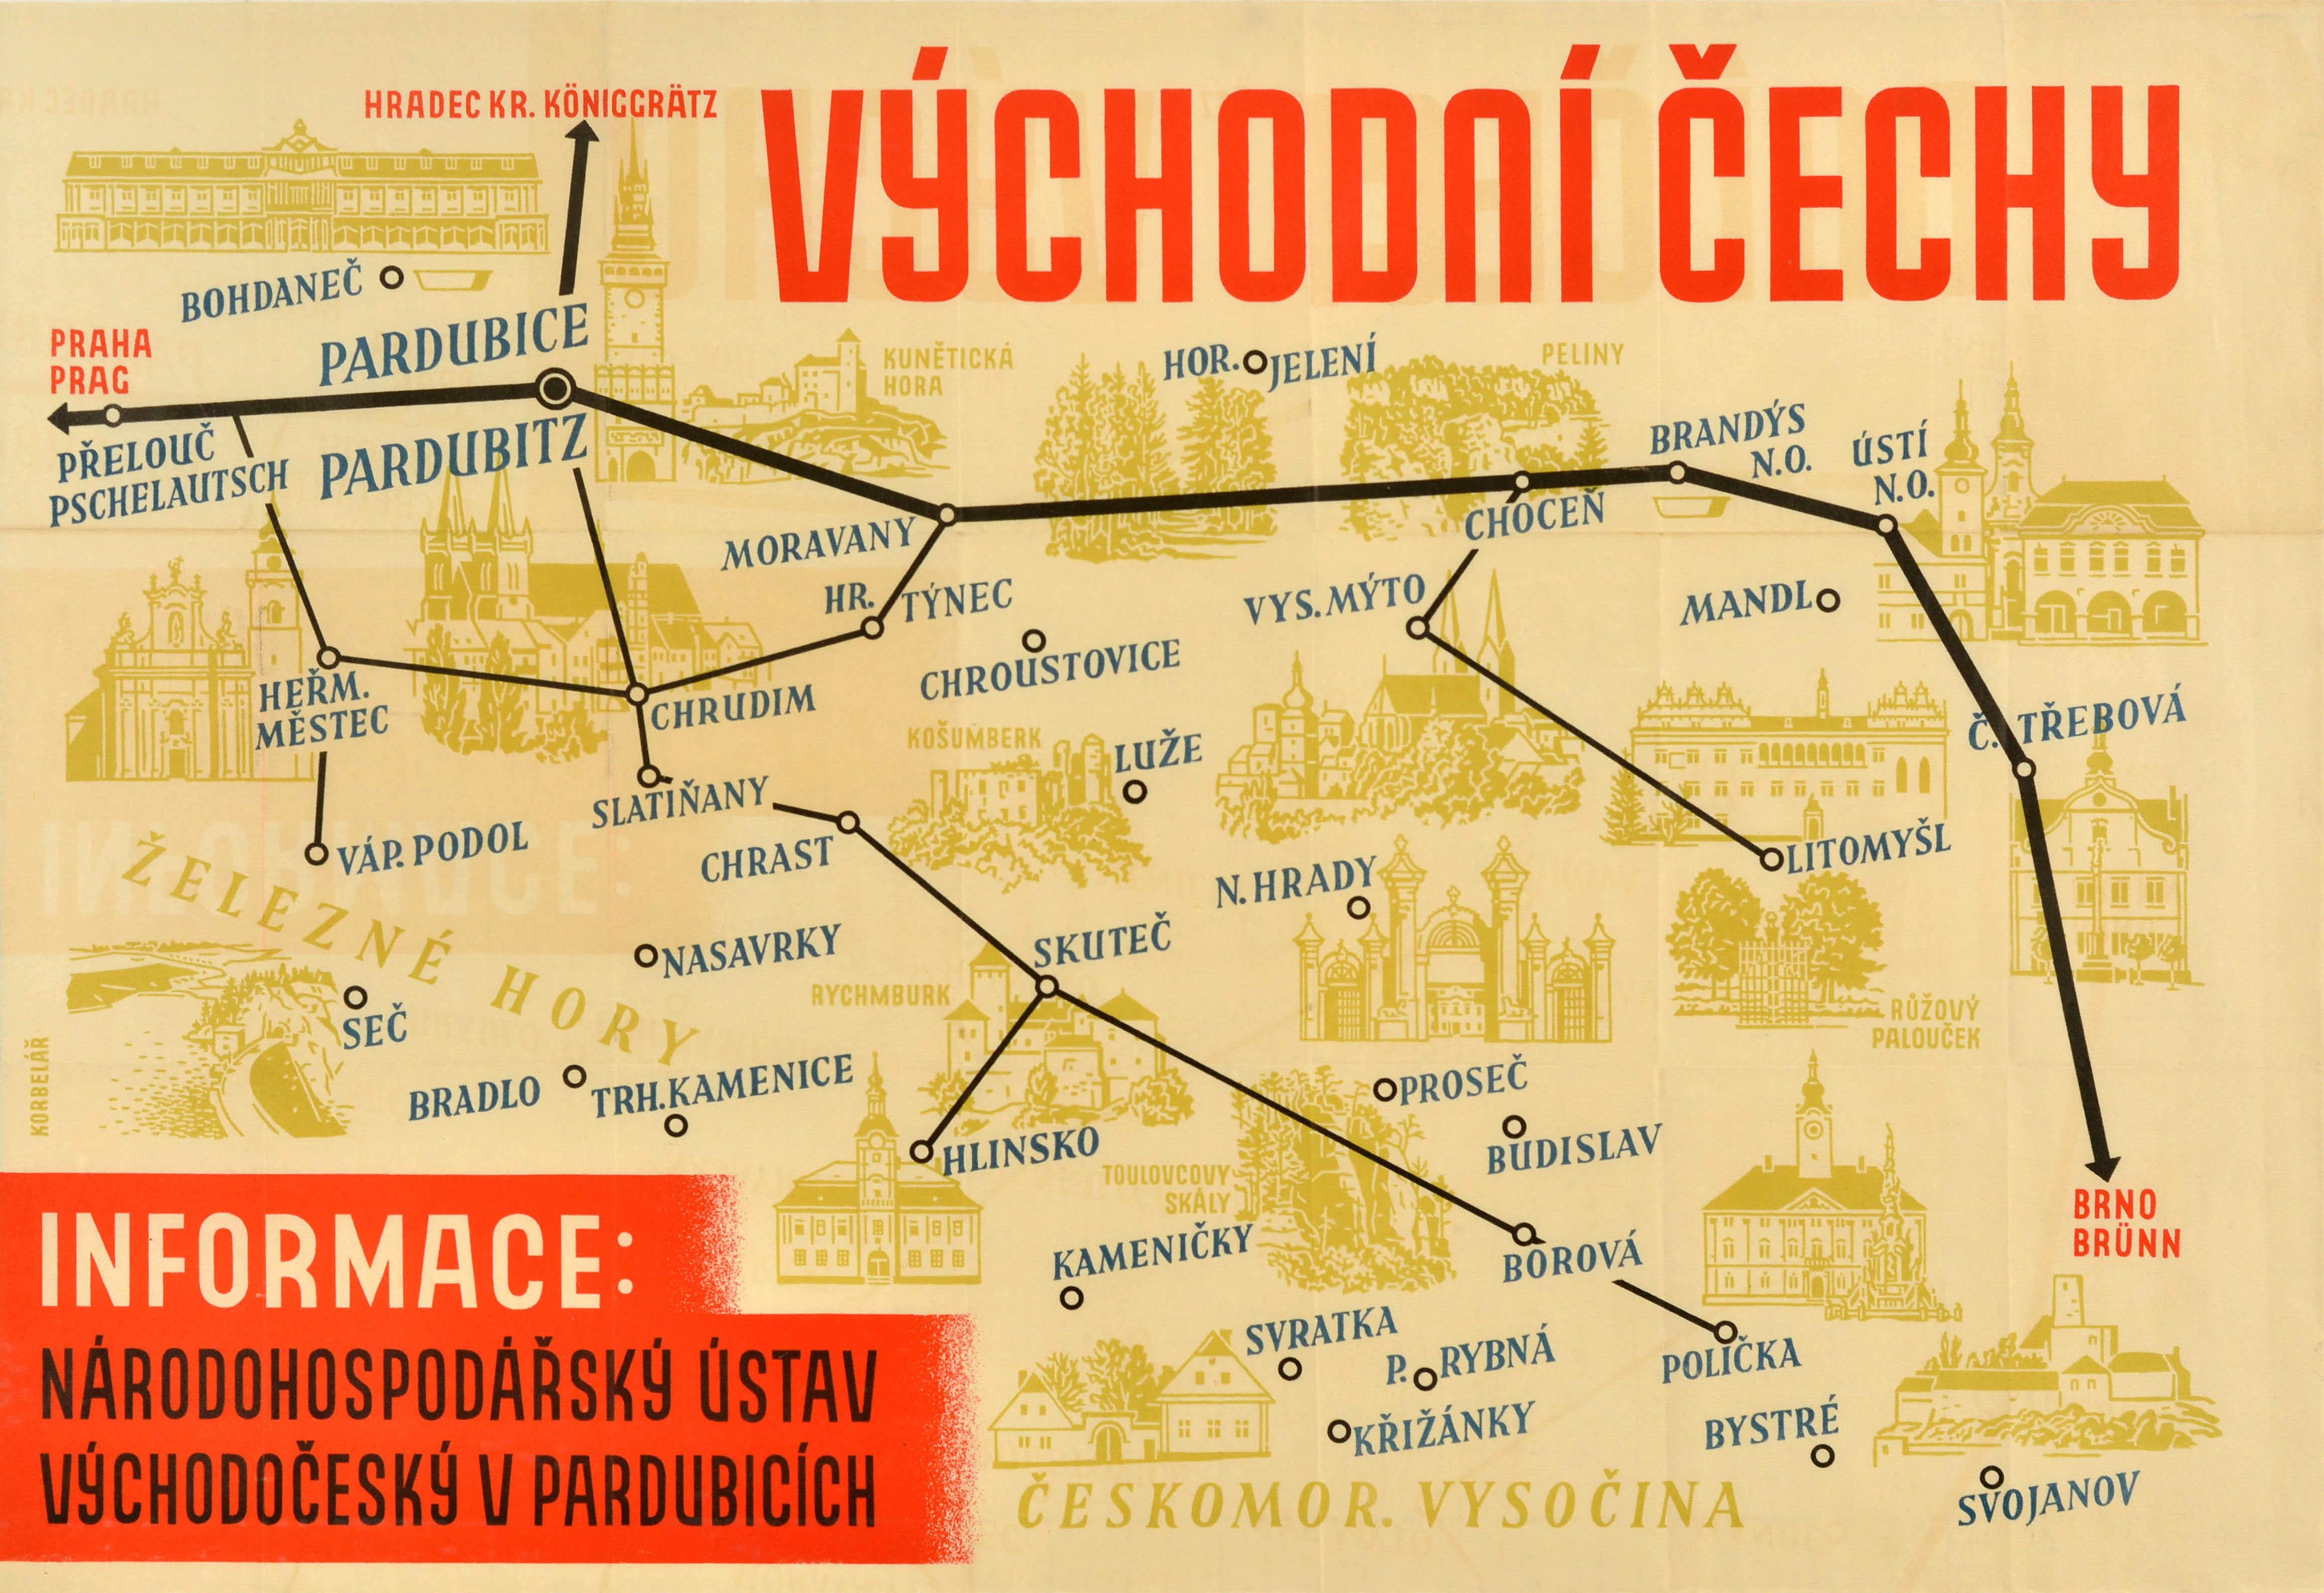 Original vintage travel map for Eastern Bohemia / Vychodni Cechy featuring route lines through the area linking cities and towns with illustrations of castles and other buildings of interest and historical significance, the title in bold red letters